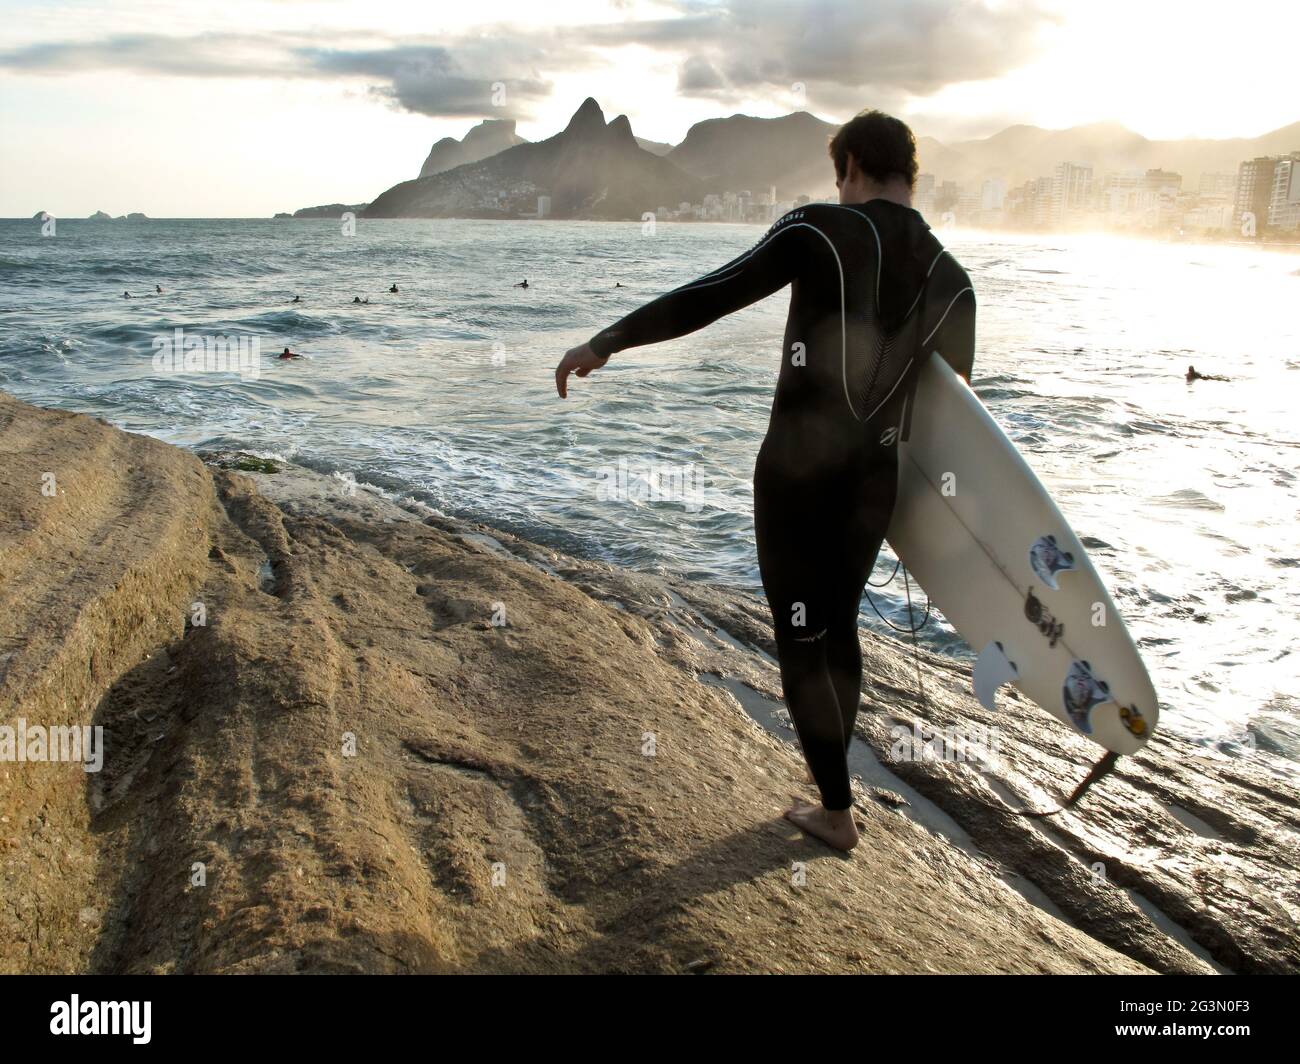 A surfer ready to jump into the water at Arpoador, the rock between Ipanema and Copacabana beaches, in Rio de Janeiro. Ipanema is in the background. Stock Photo